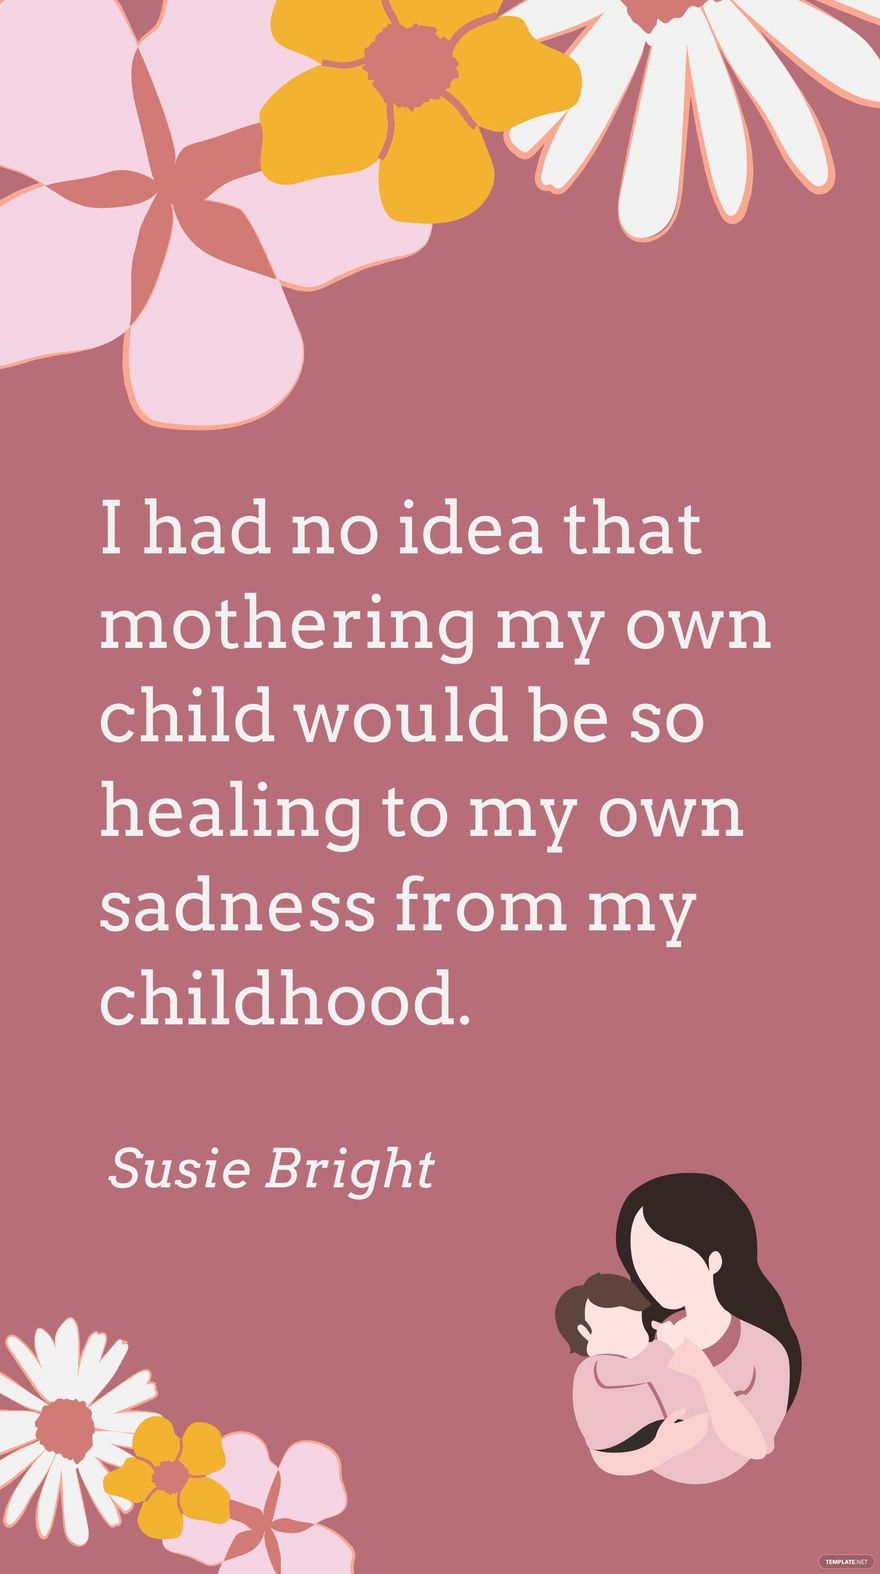 Susie Bright - I had no idea that mothering my own child would be so healing to my own sadness from my childhood.